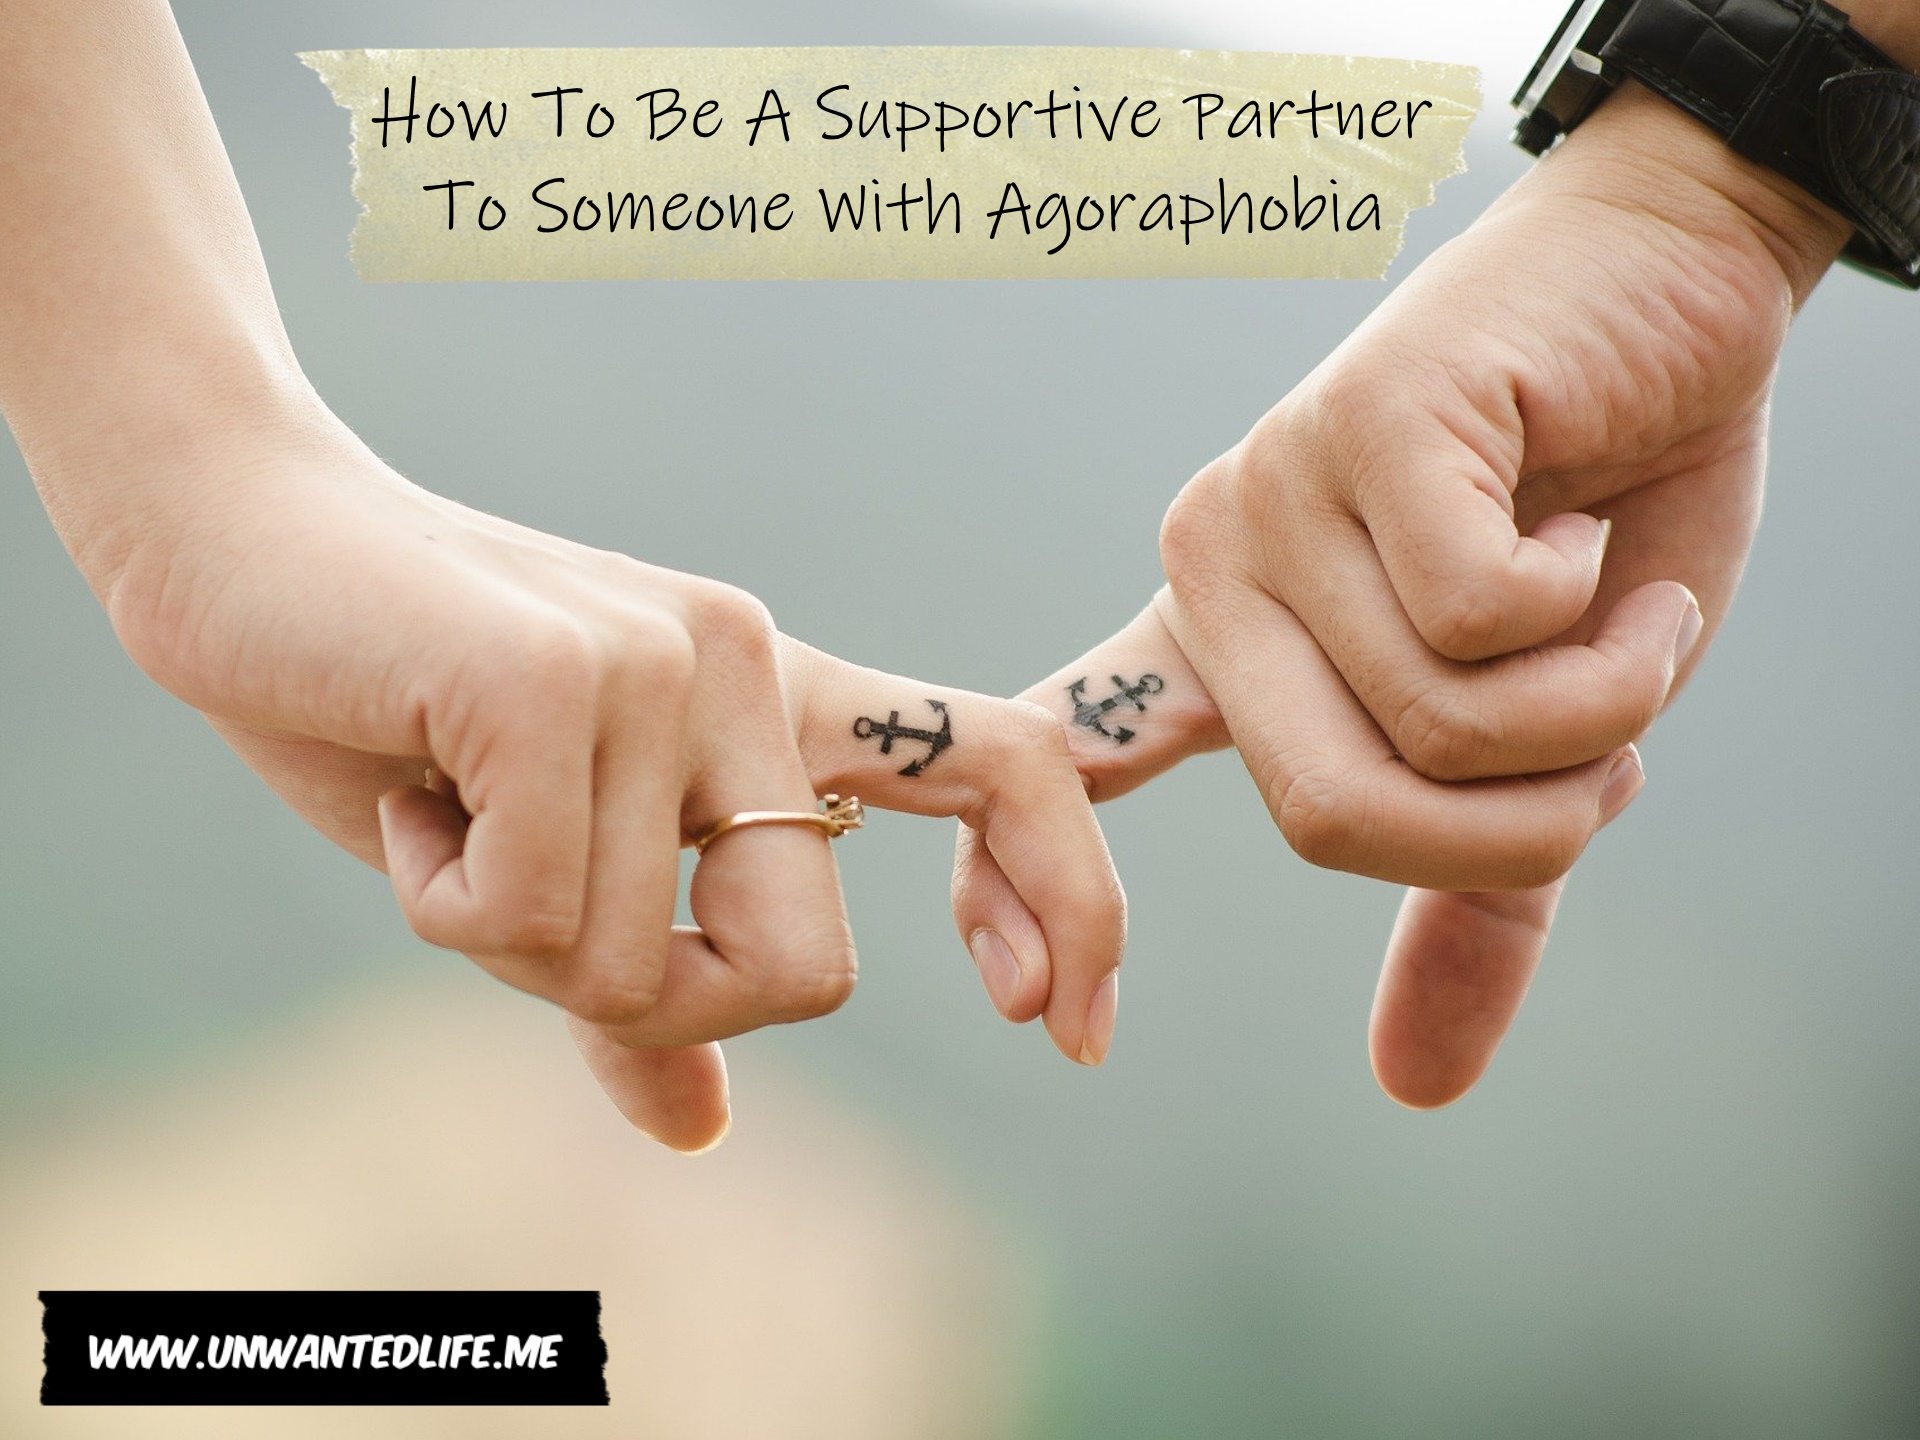 A photo of a couple holding hands by holny holding to of their fingers together, both of which have a matching anchor tattoo to represent the topic of the article - How To Be A Supportive Partner To Someone With Agoraphobia